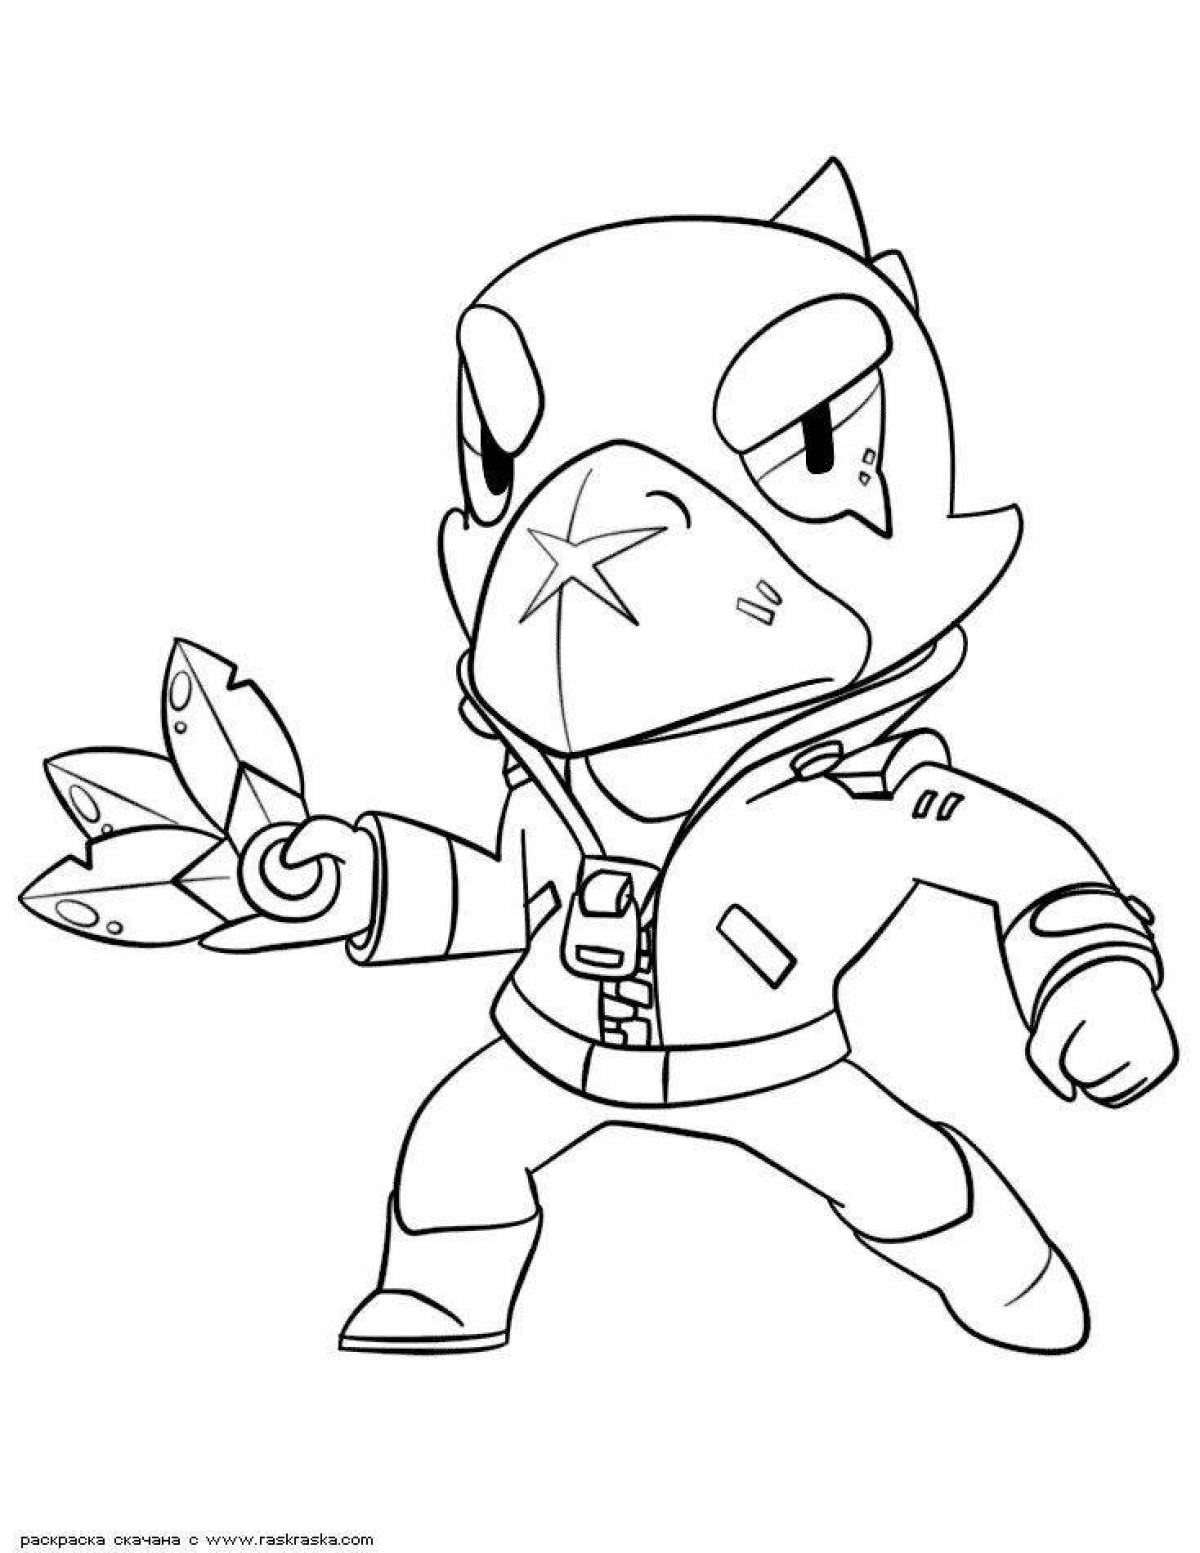 Feng glowing coloring book from brawl stars